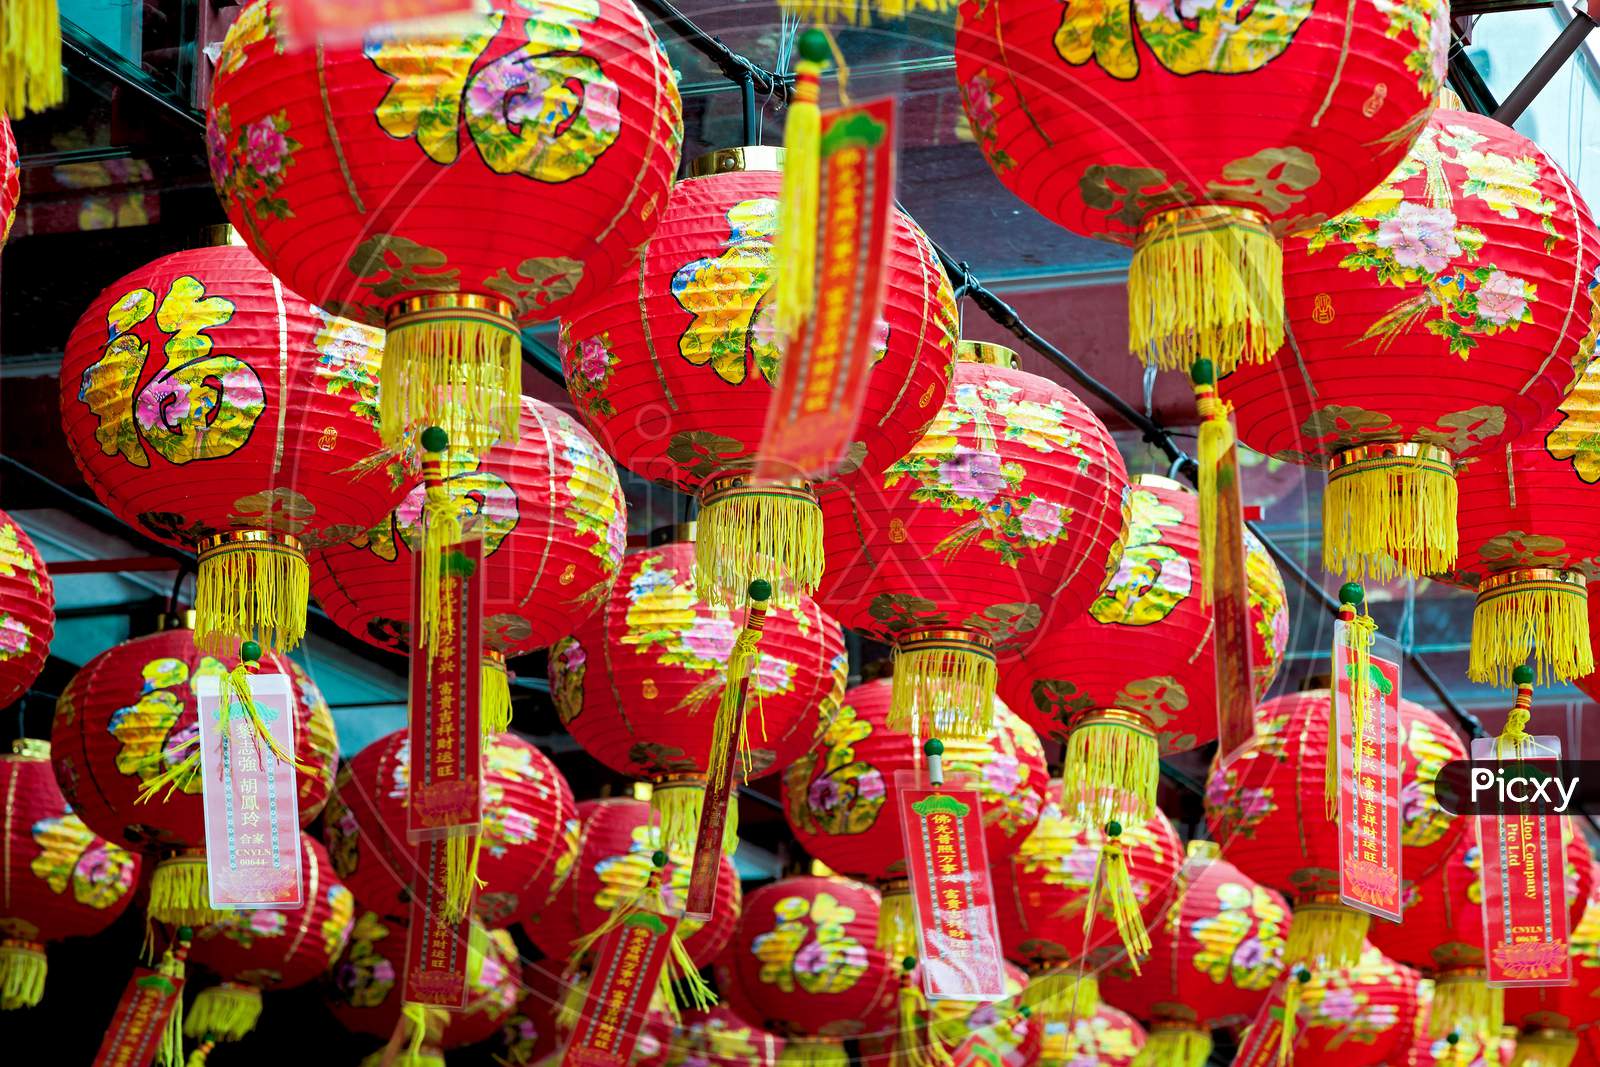 Chinese Lanterns Outside A Building In Singapore